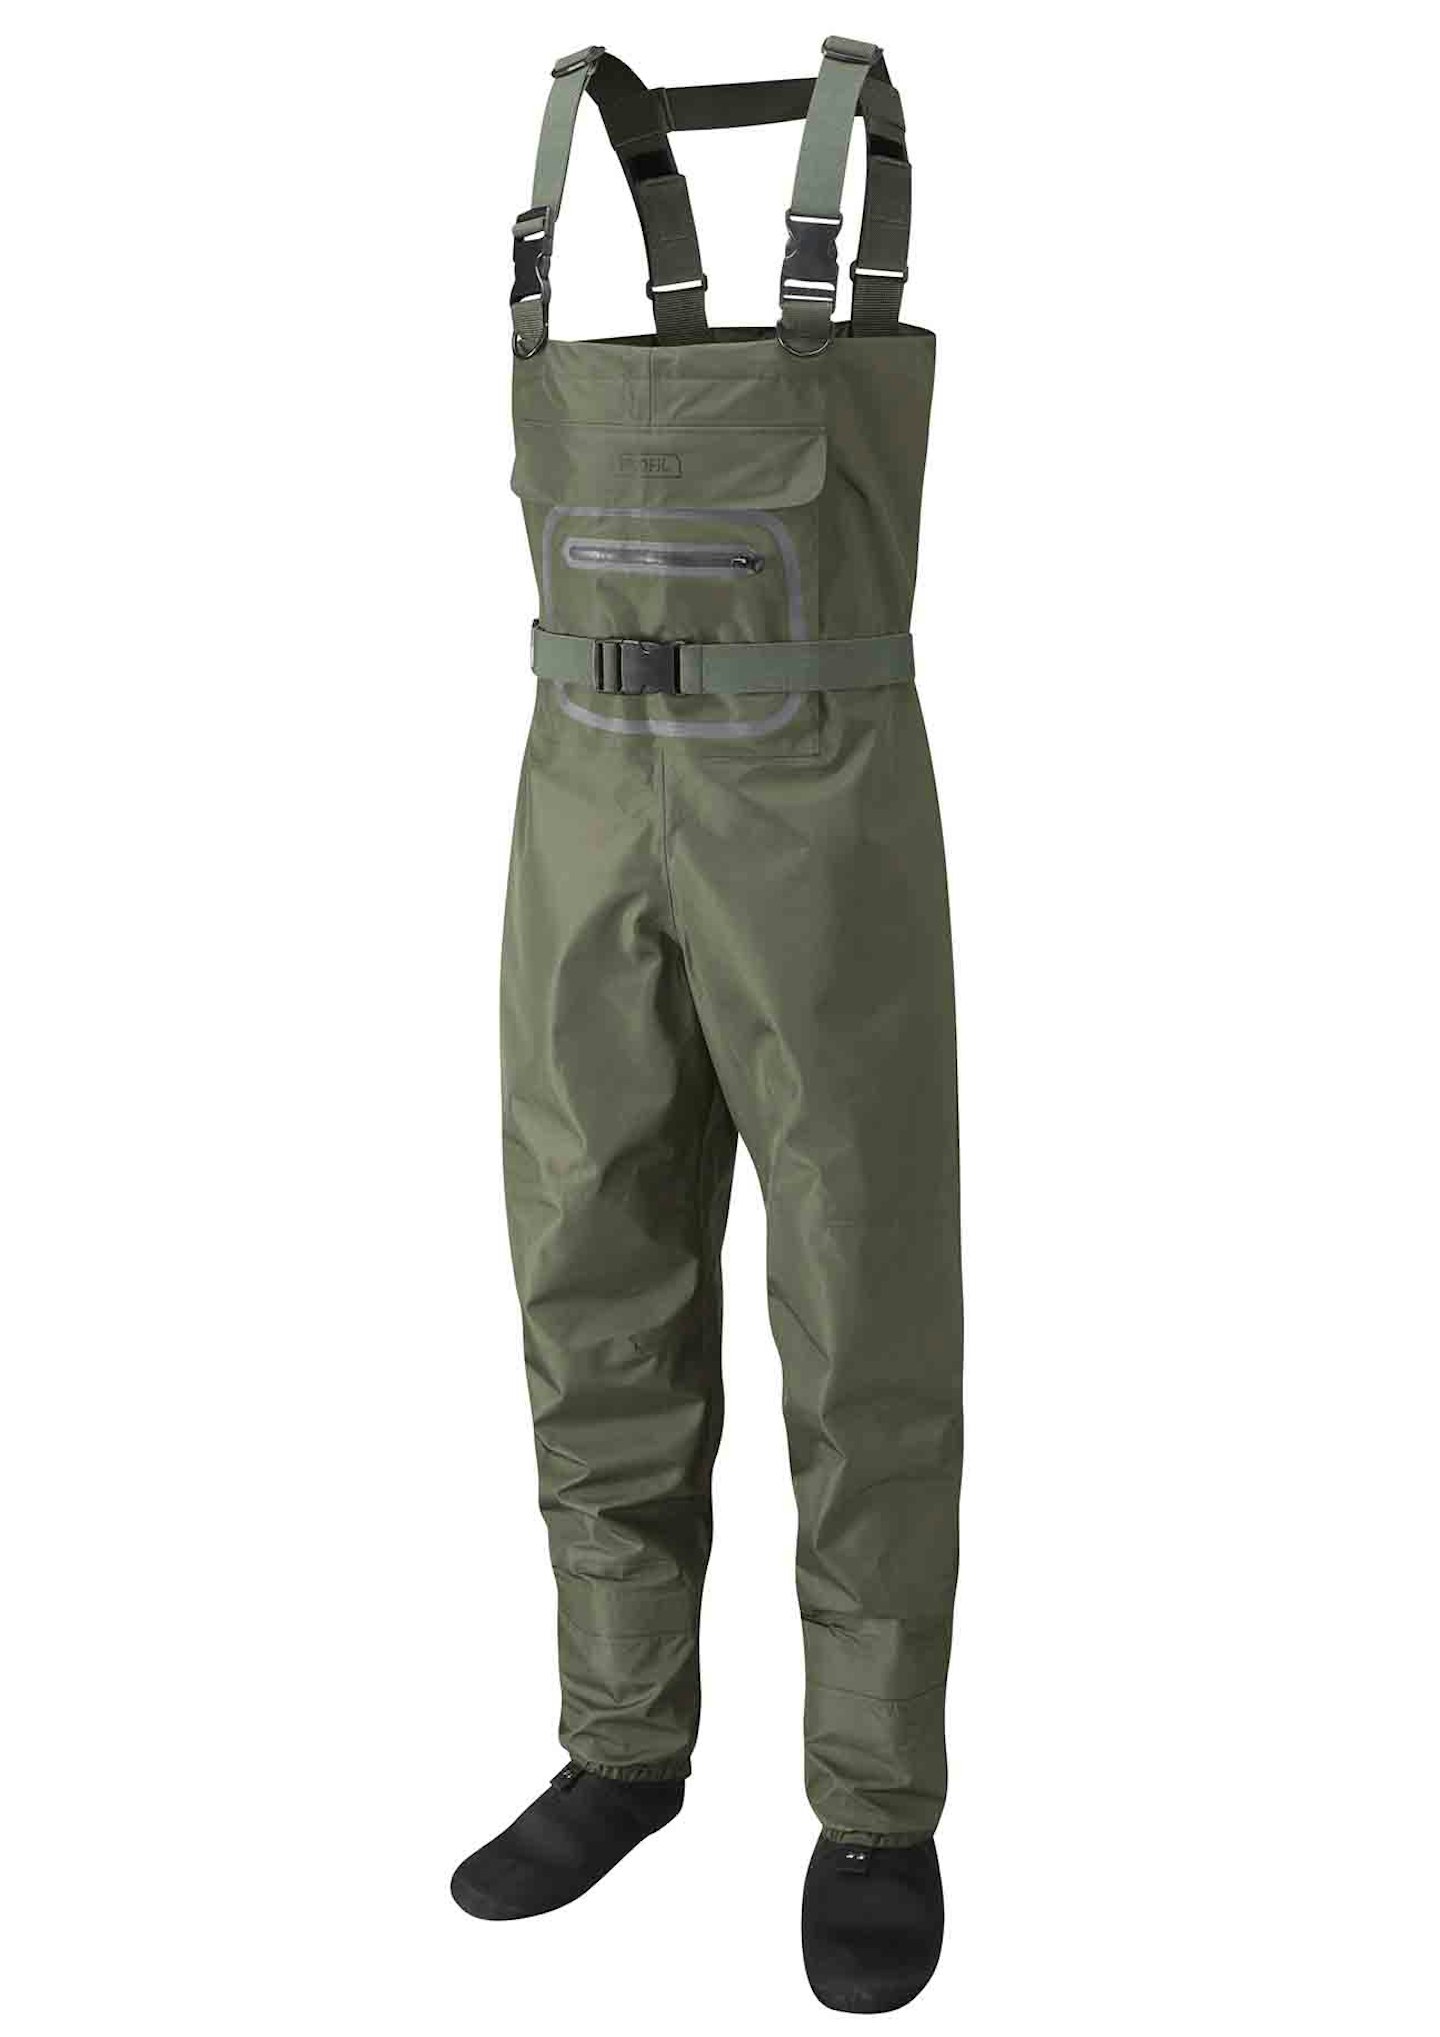 The Best Fishing Waders